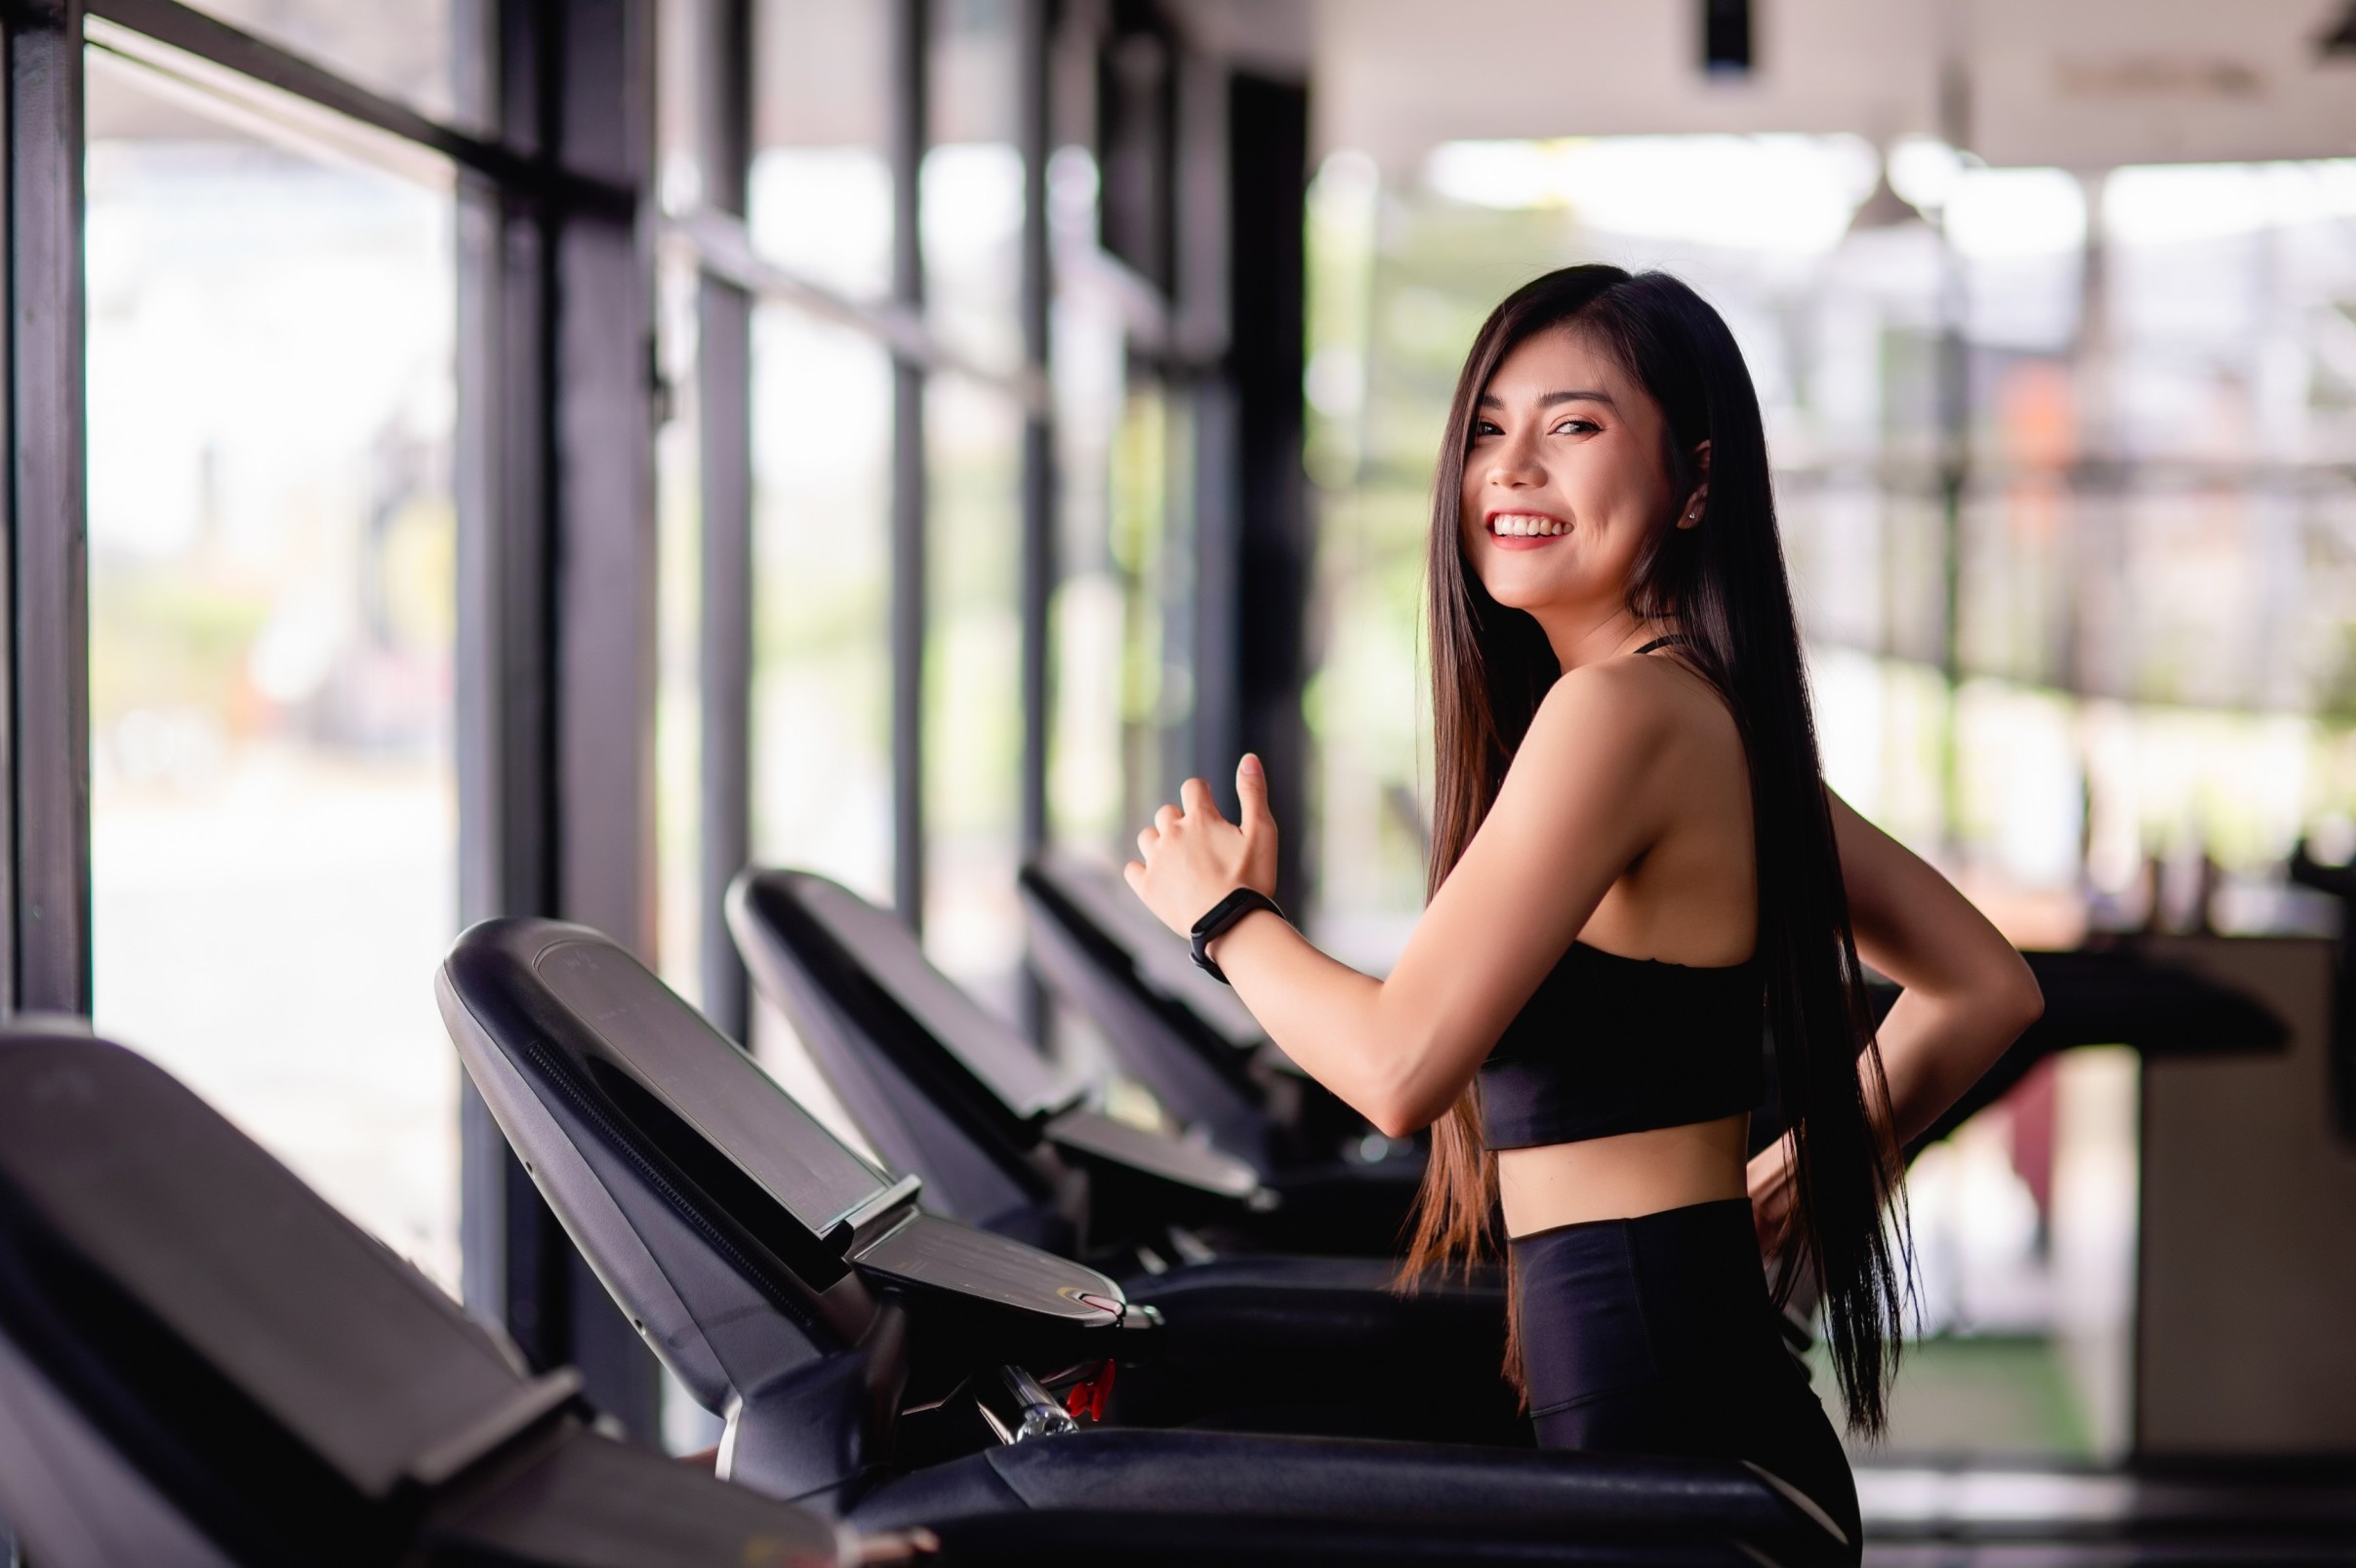 portrait-young-healthy-woman-running-treadmill-she-smile-during-workout-gym-healthy-lifestyle-concept-copy-space-vertical-image-1-1